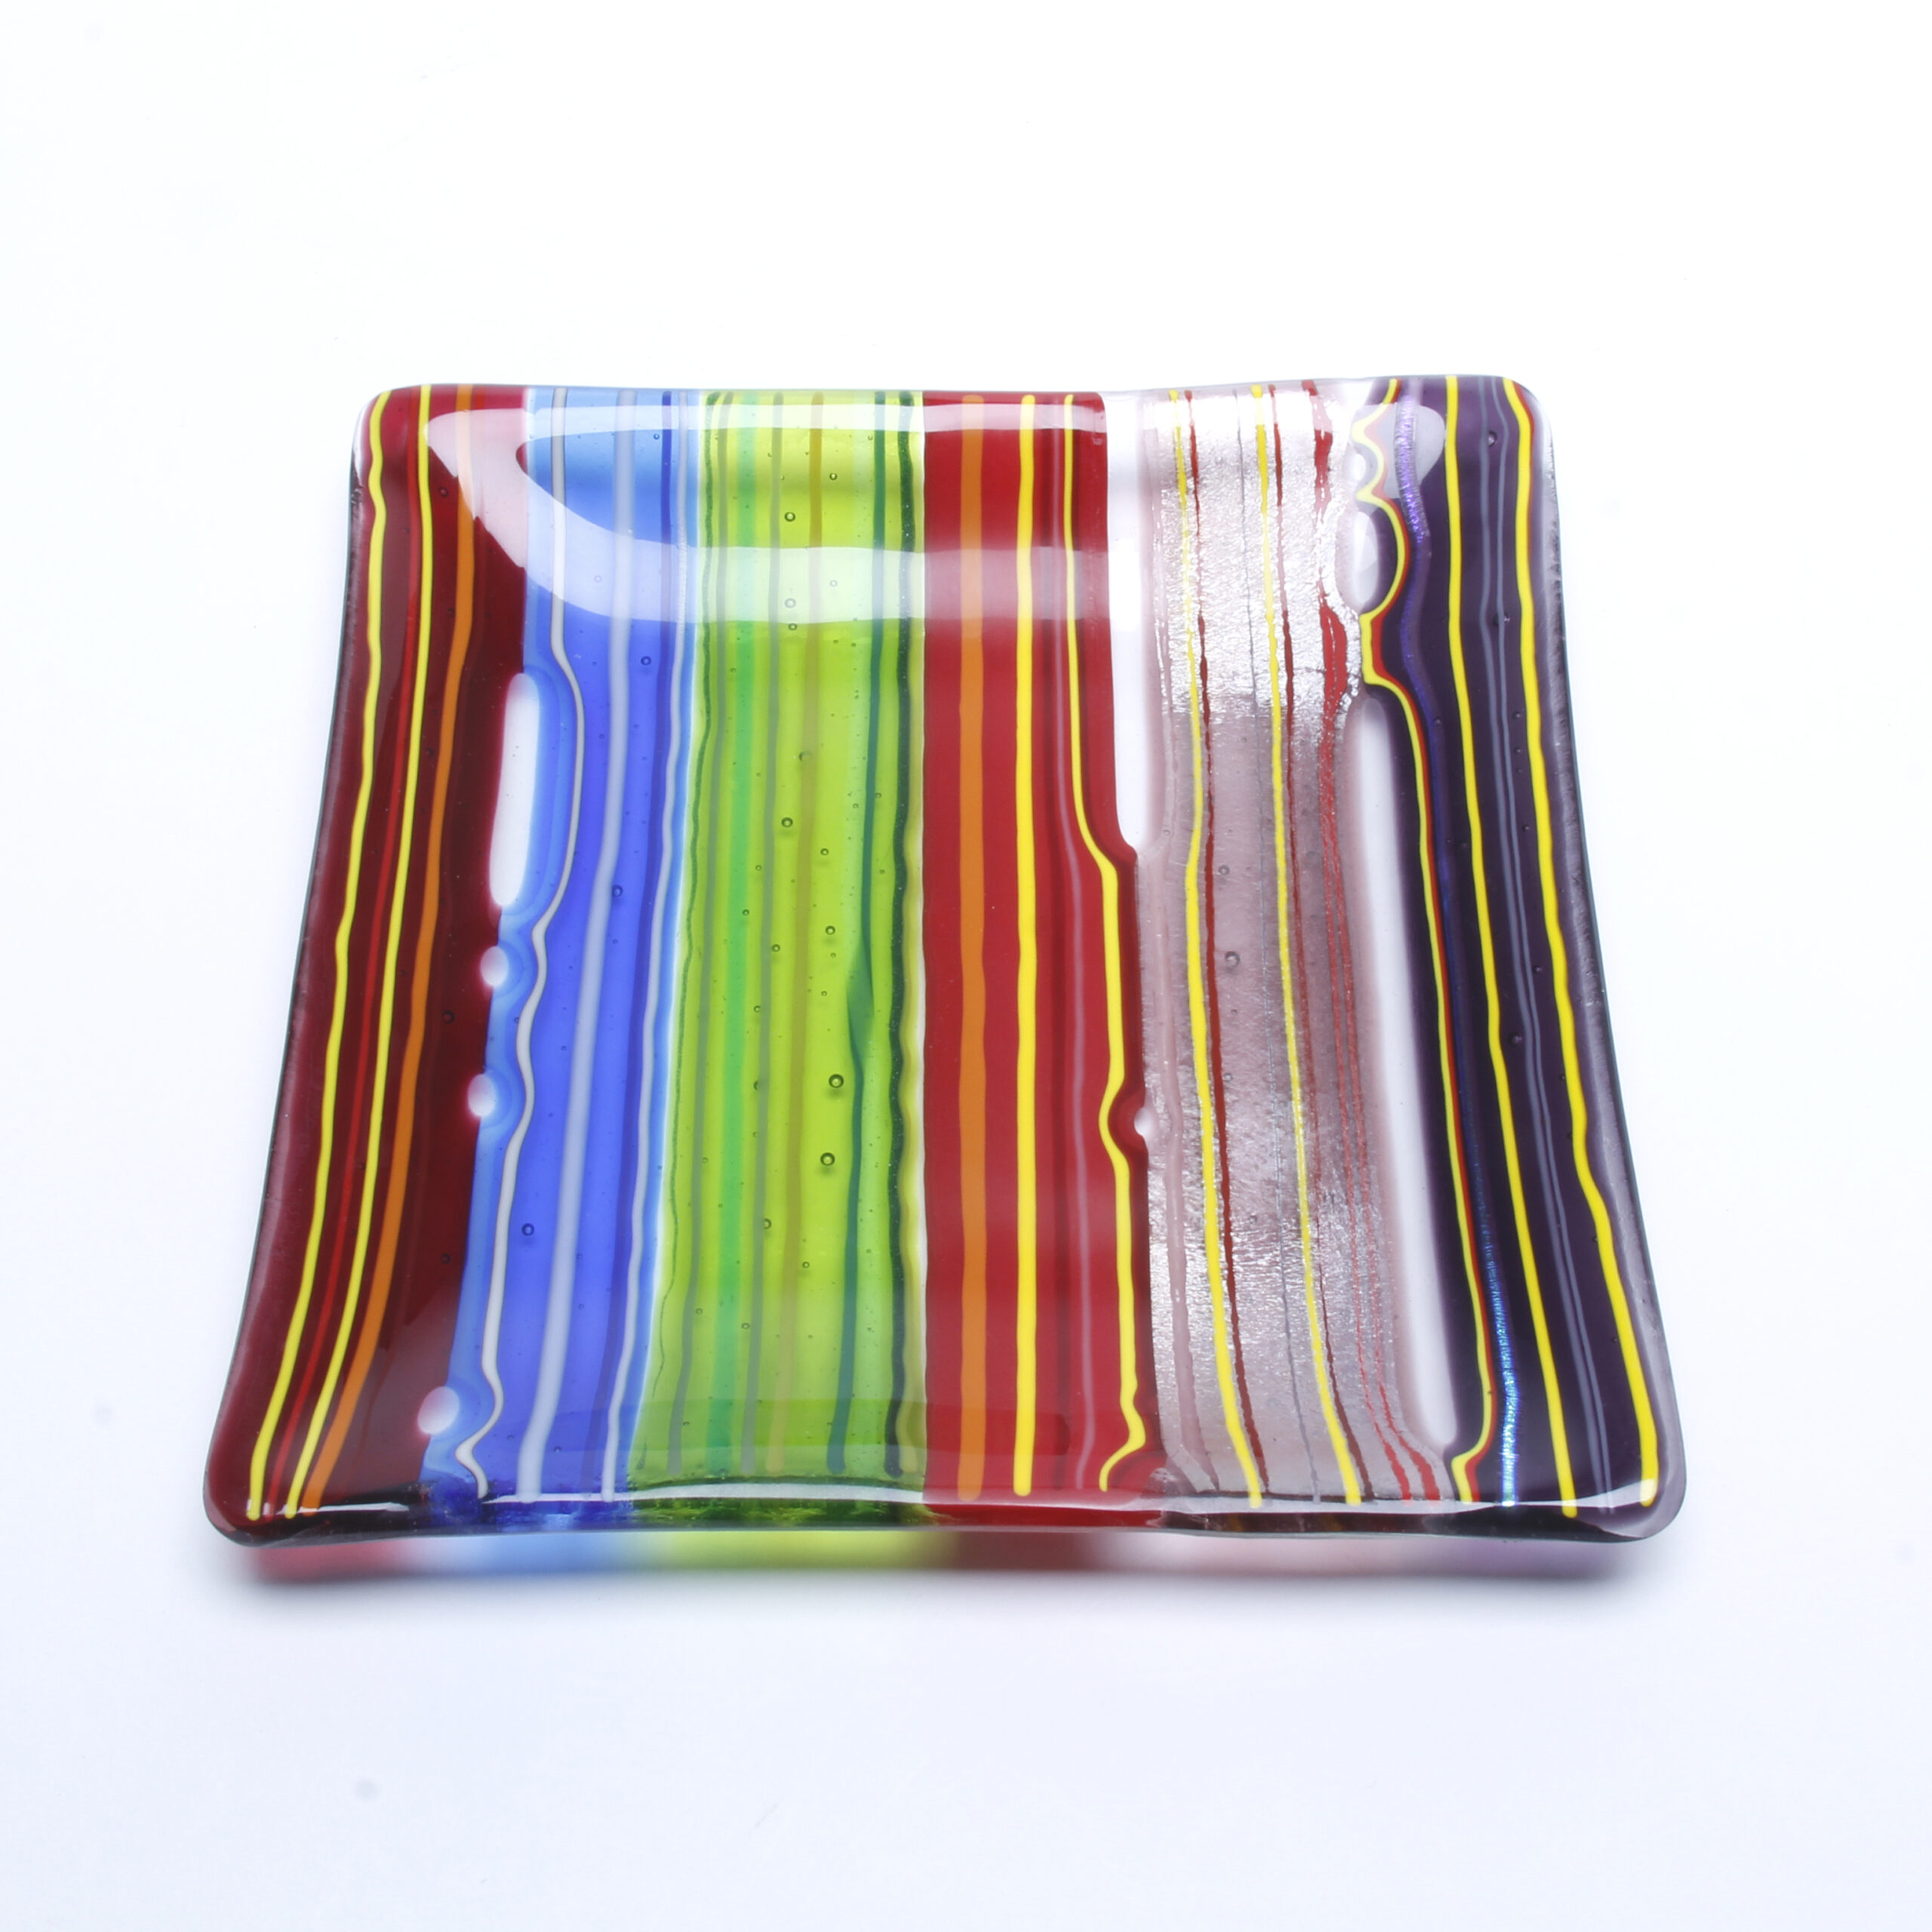 Trio Design Glassware: 7 inch Candy Dish (Each sold separately) Product Image 3 of 3